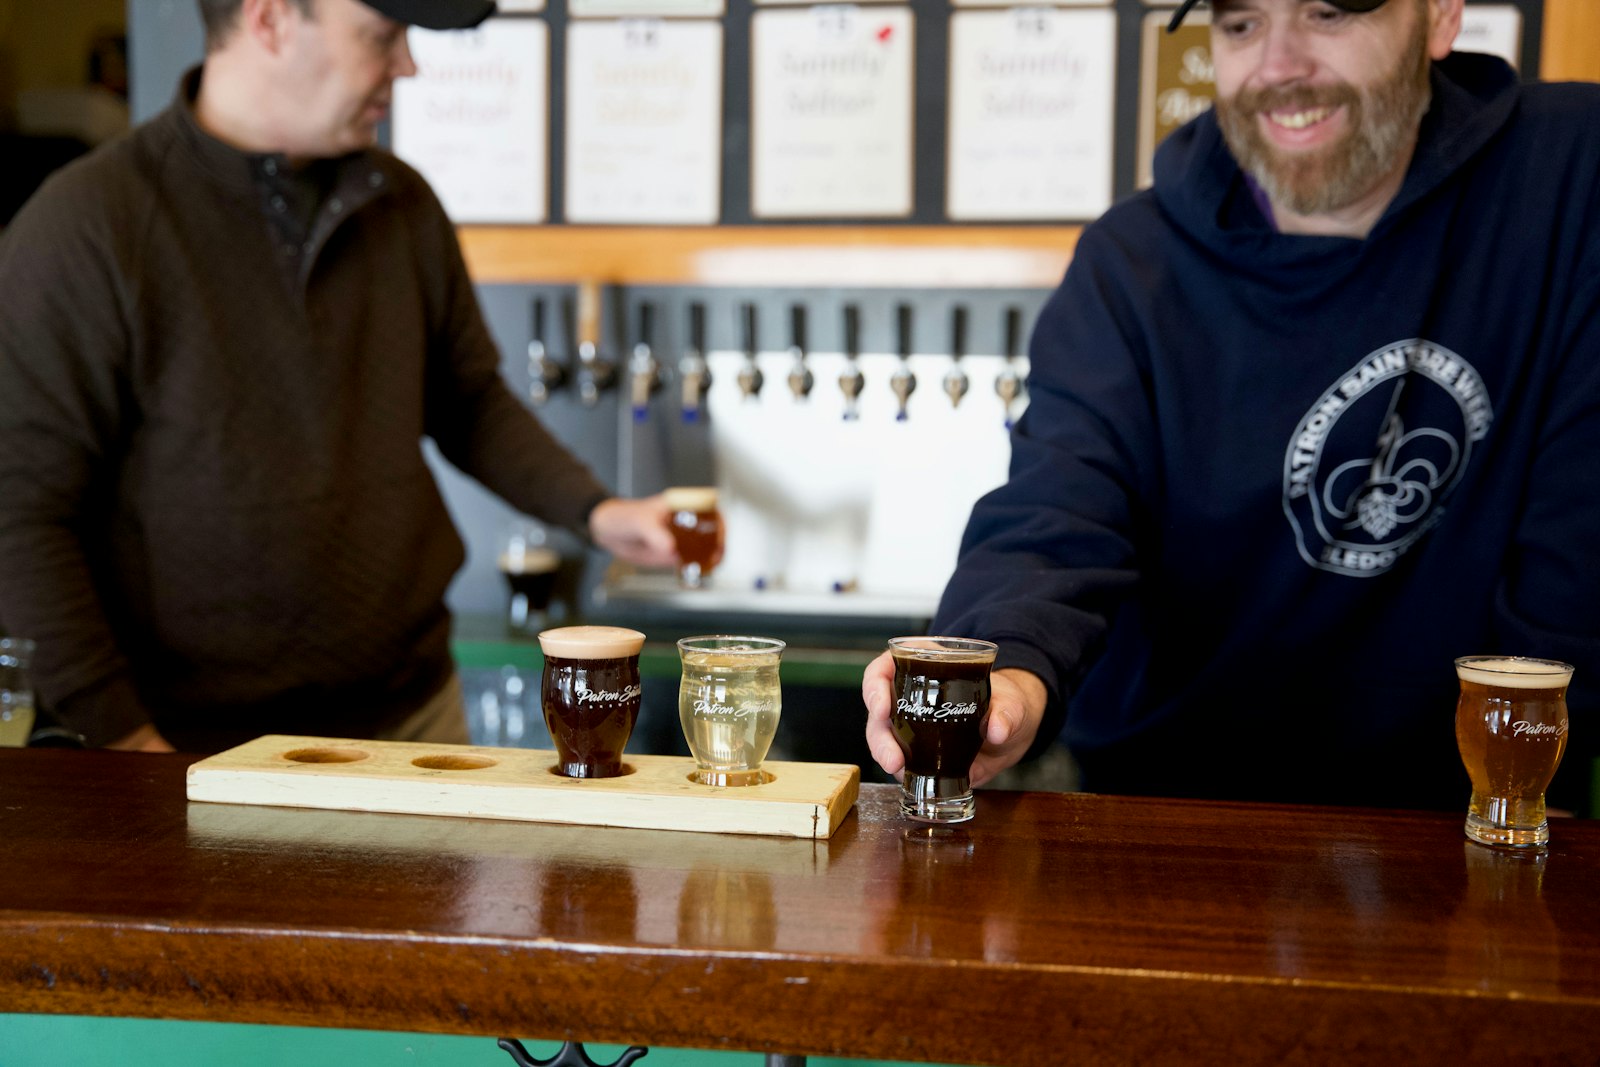 The idea for a brick-and-mortar brewery started as a desire to turn a hobby into a side gig for extra income. The brewery was opened in July 2018 on the west side of Toledo and soon after became a full-time job for both men.